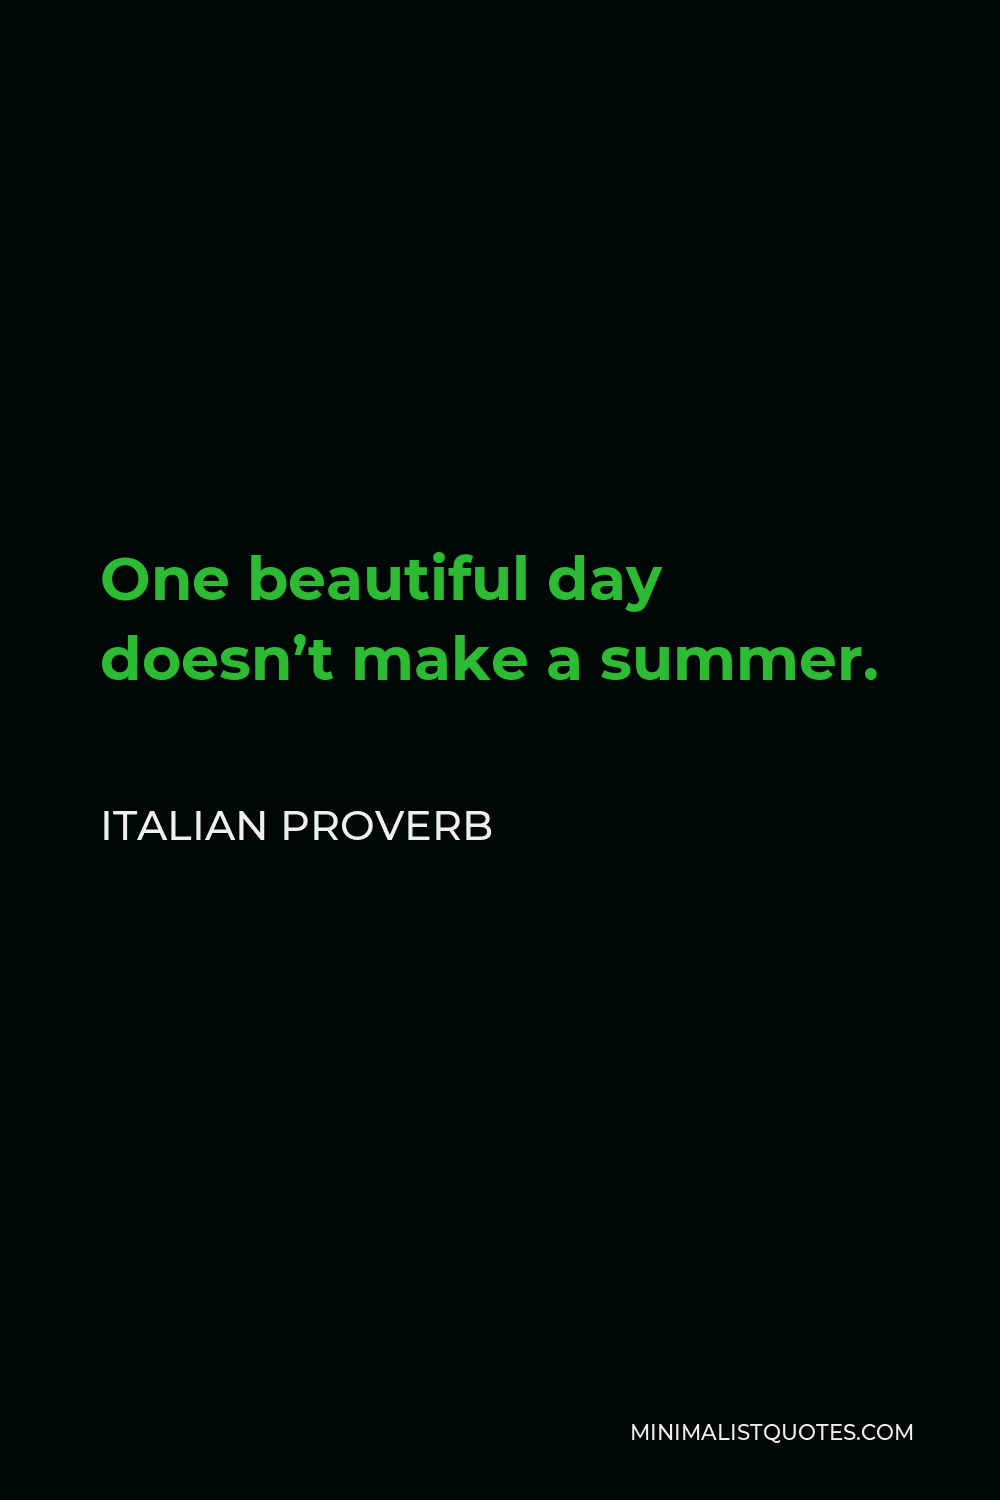 Italian Proverb Quote - One beautiful day doesn’t make a summer.